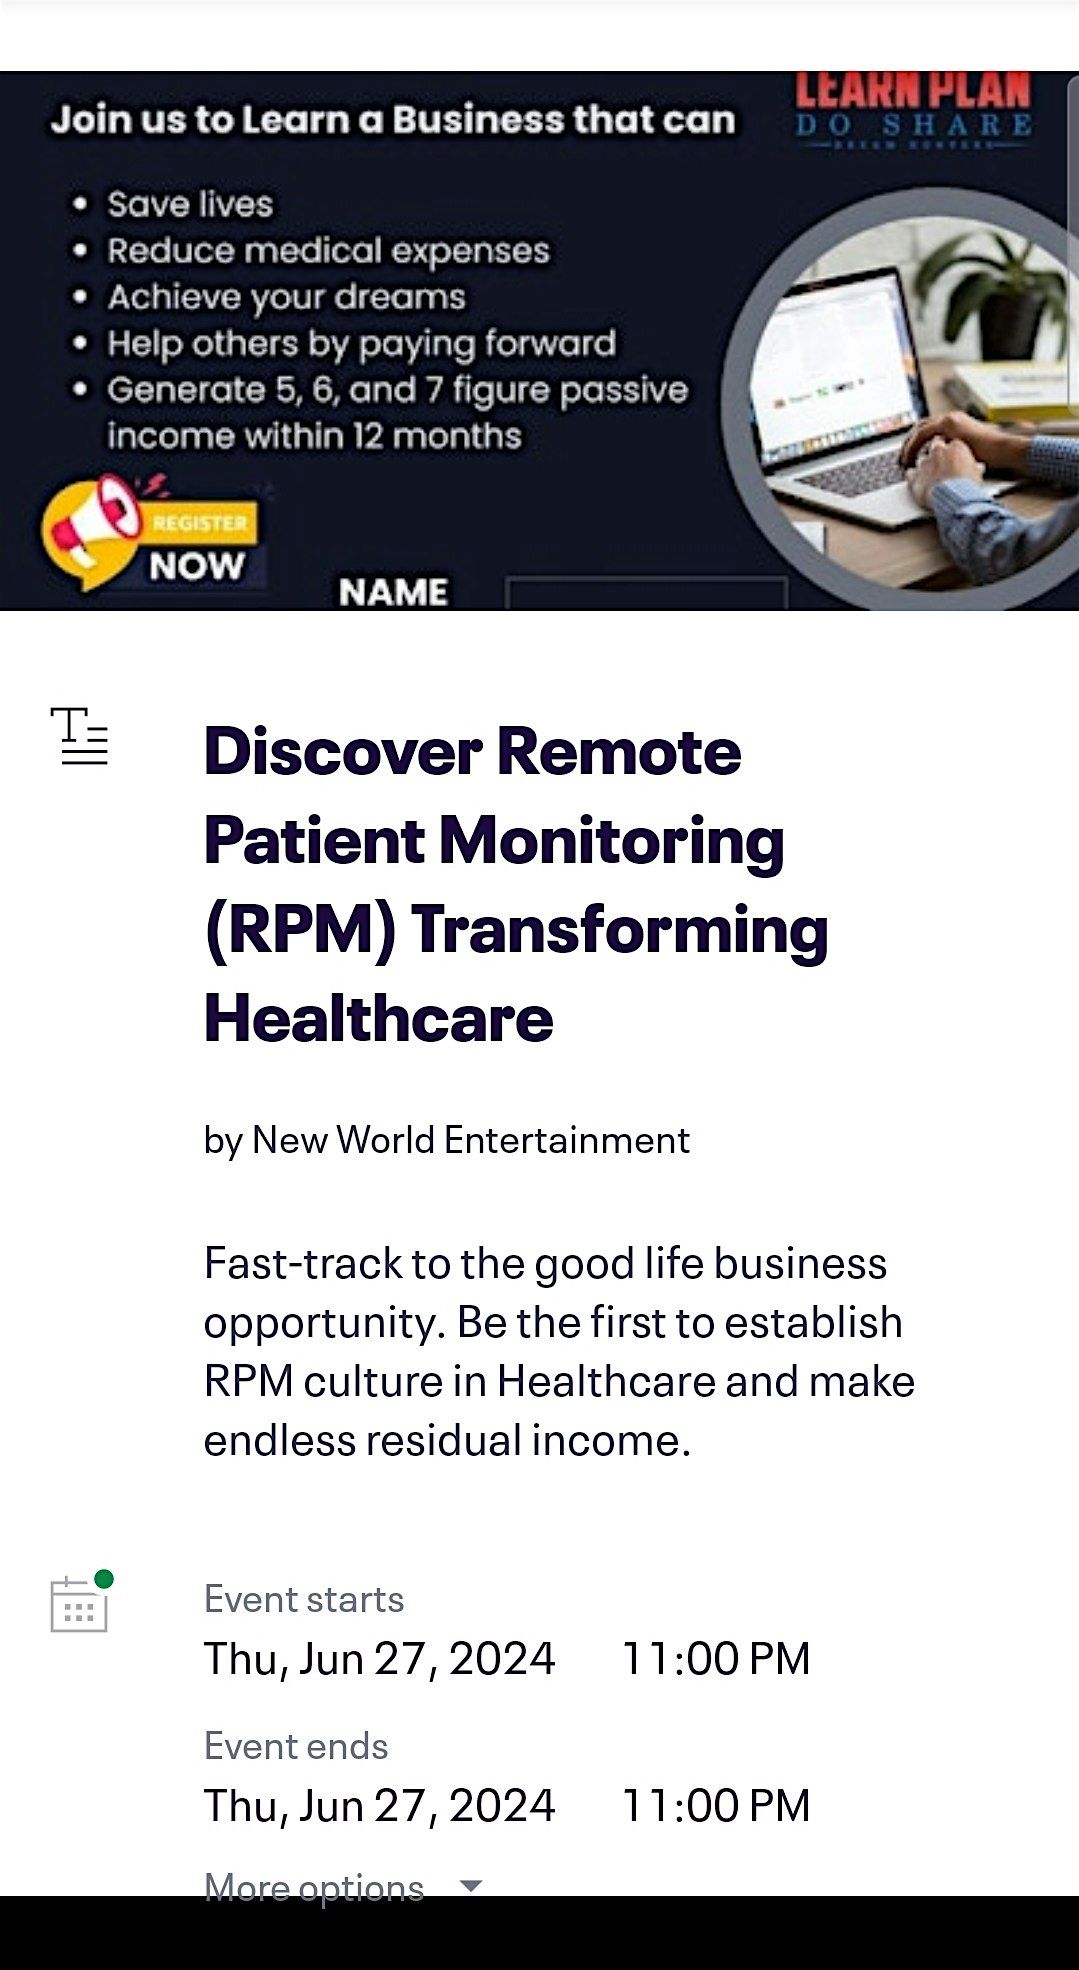 Discover Remote Patient Monitoring (RPM) Transforming Healthcare